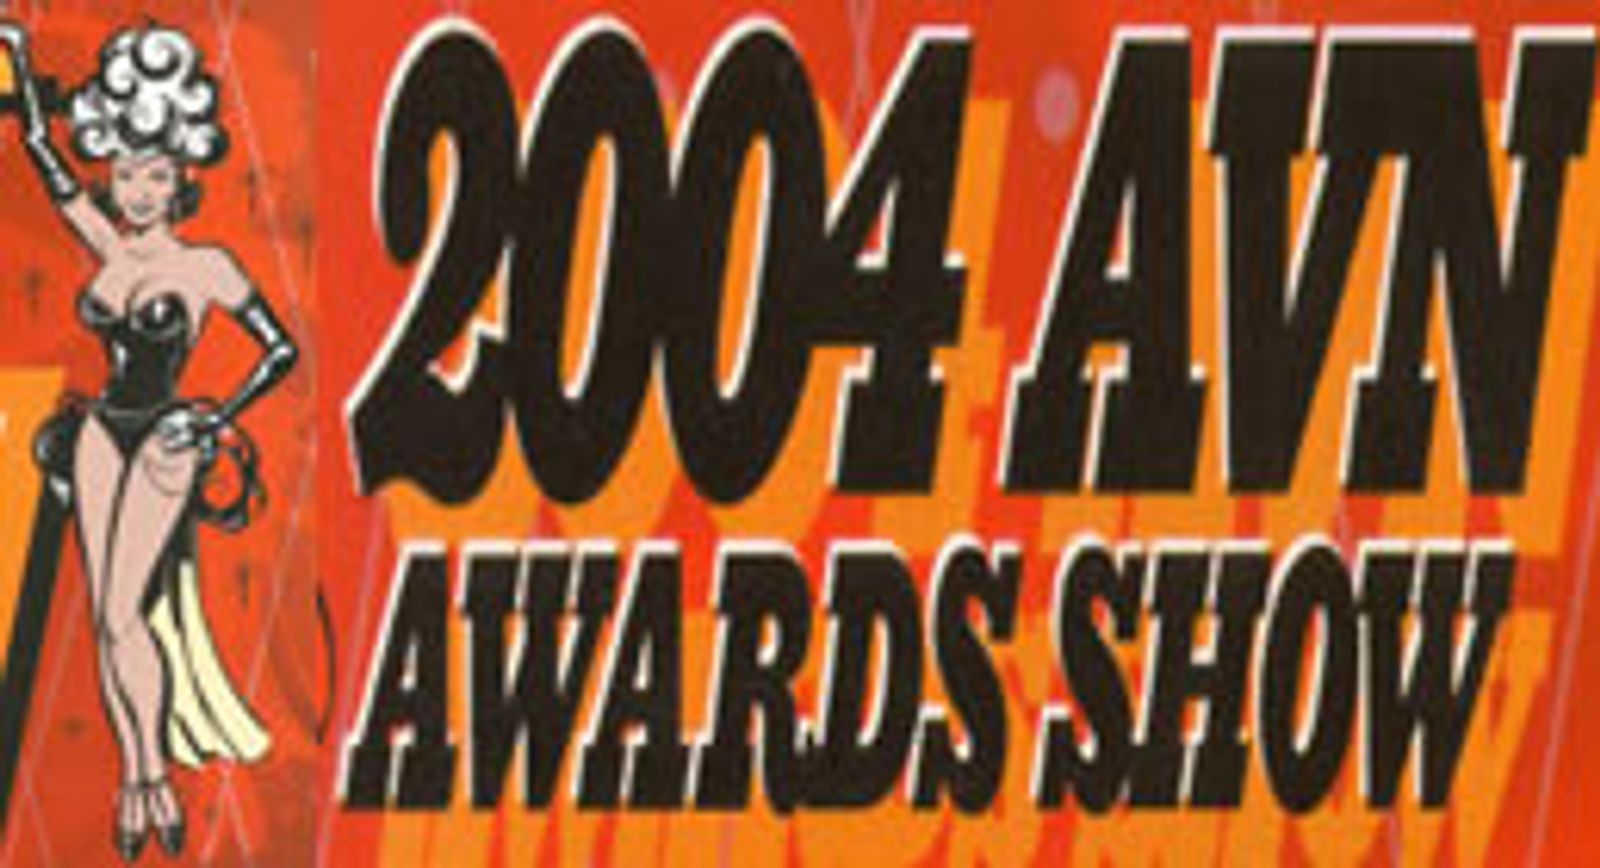 AVN Awards Update: Sept. 30 Cut-Off Date for Awards Consideration Fast Approaching